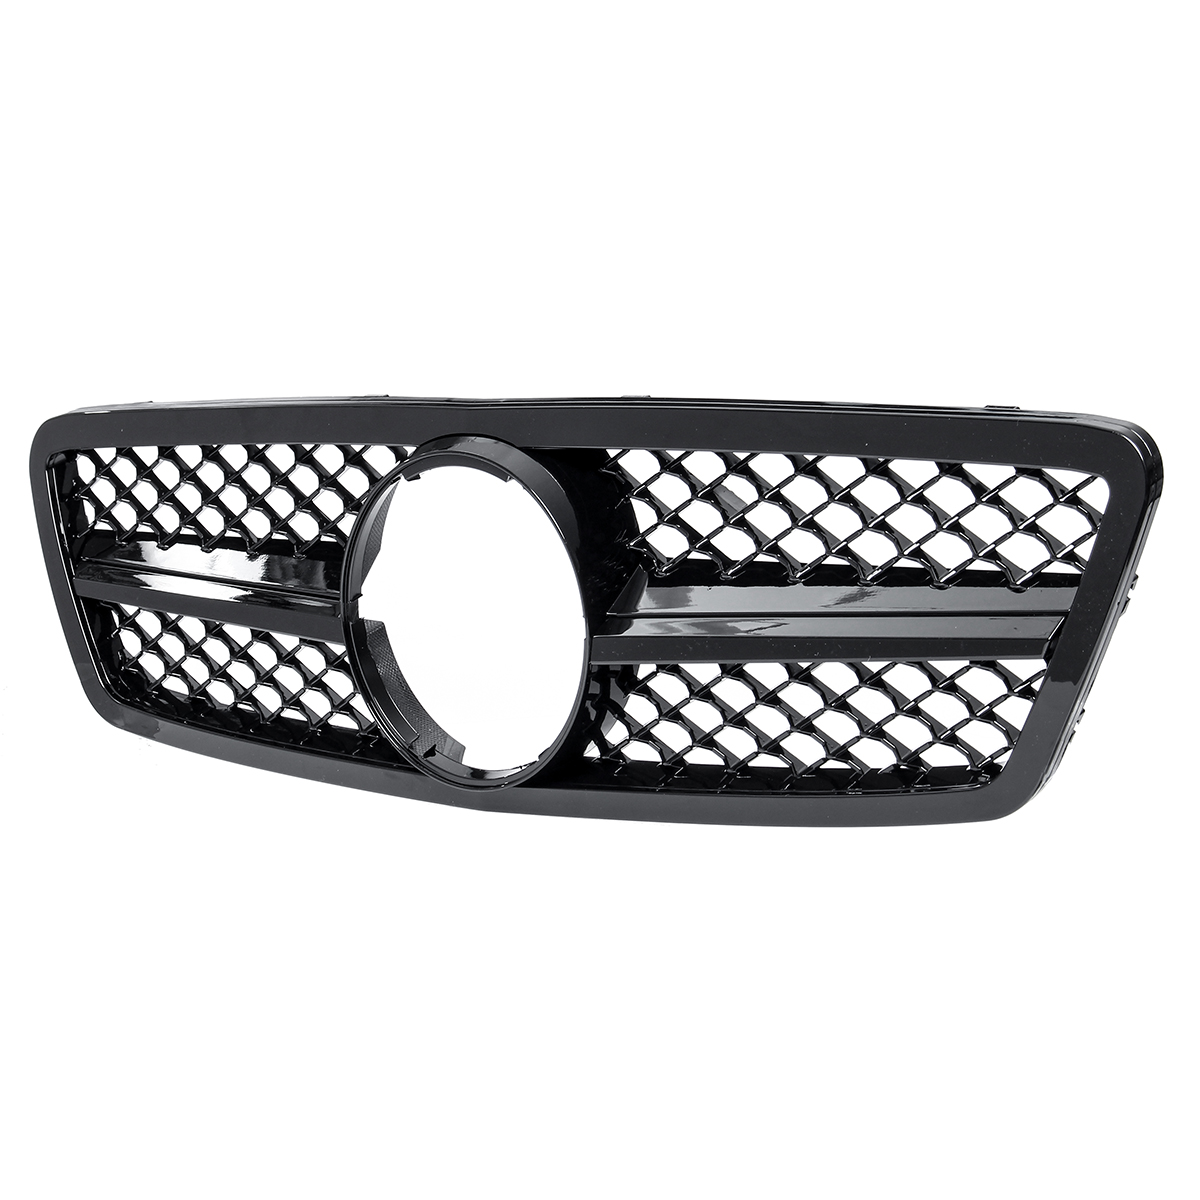 Glossy Black Front Grille Grill AMG Style for Mercedes Benz C-Class W203 S203 C280 C320 C240 C200 2001-2007